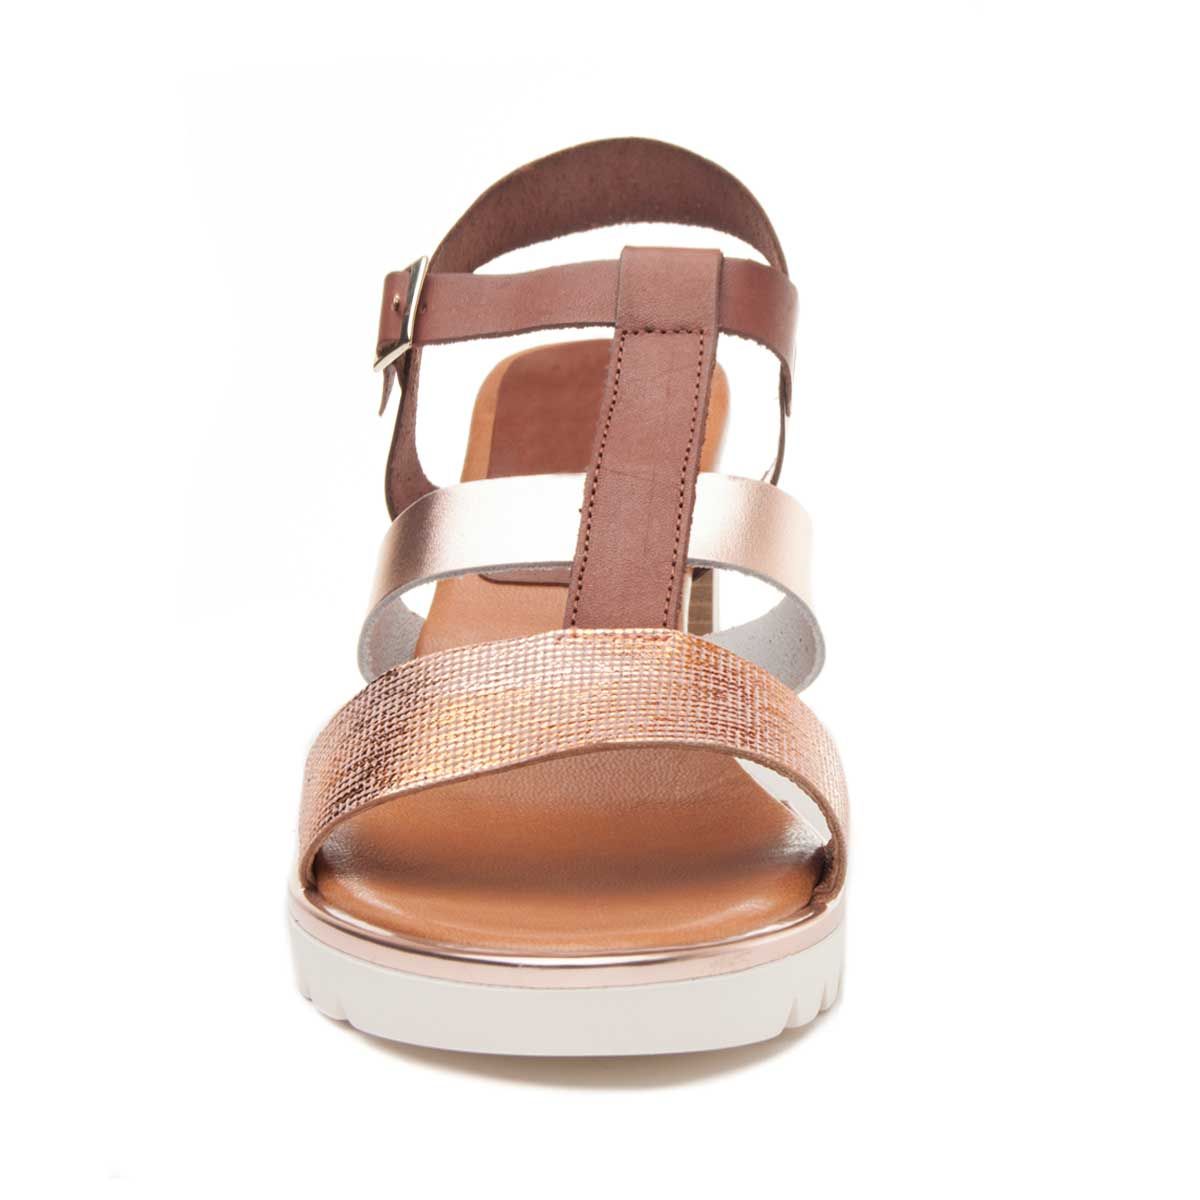 These new sandals meet everything you need to make your summer perfect. Perfect combination between quality, community and design. Manufactured 100% in leather, with padded plant also made of skin and non-slip and light polyurethane sole, nothing weigh. Its combinations of colors and textures make these sandals unique pieces very top and easy to combine. Natural skin, ergonomic, flexible, footprint effect, soft, absorbing, breathable, shock Absorbing, lightweight and anti-slip..description Technical: External materialTuraleMaterial Interior: Natural Leather.Material Plant: Natural Leather.Material Sole: Polyurethane. , 5.Atout Platform: 2.Eottura Tacon: 0.Ture Bag0.Proofundity Bag